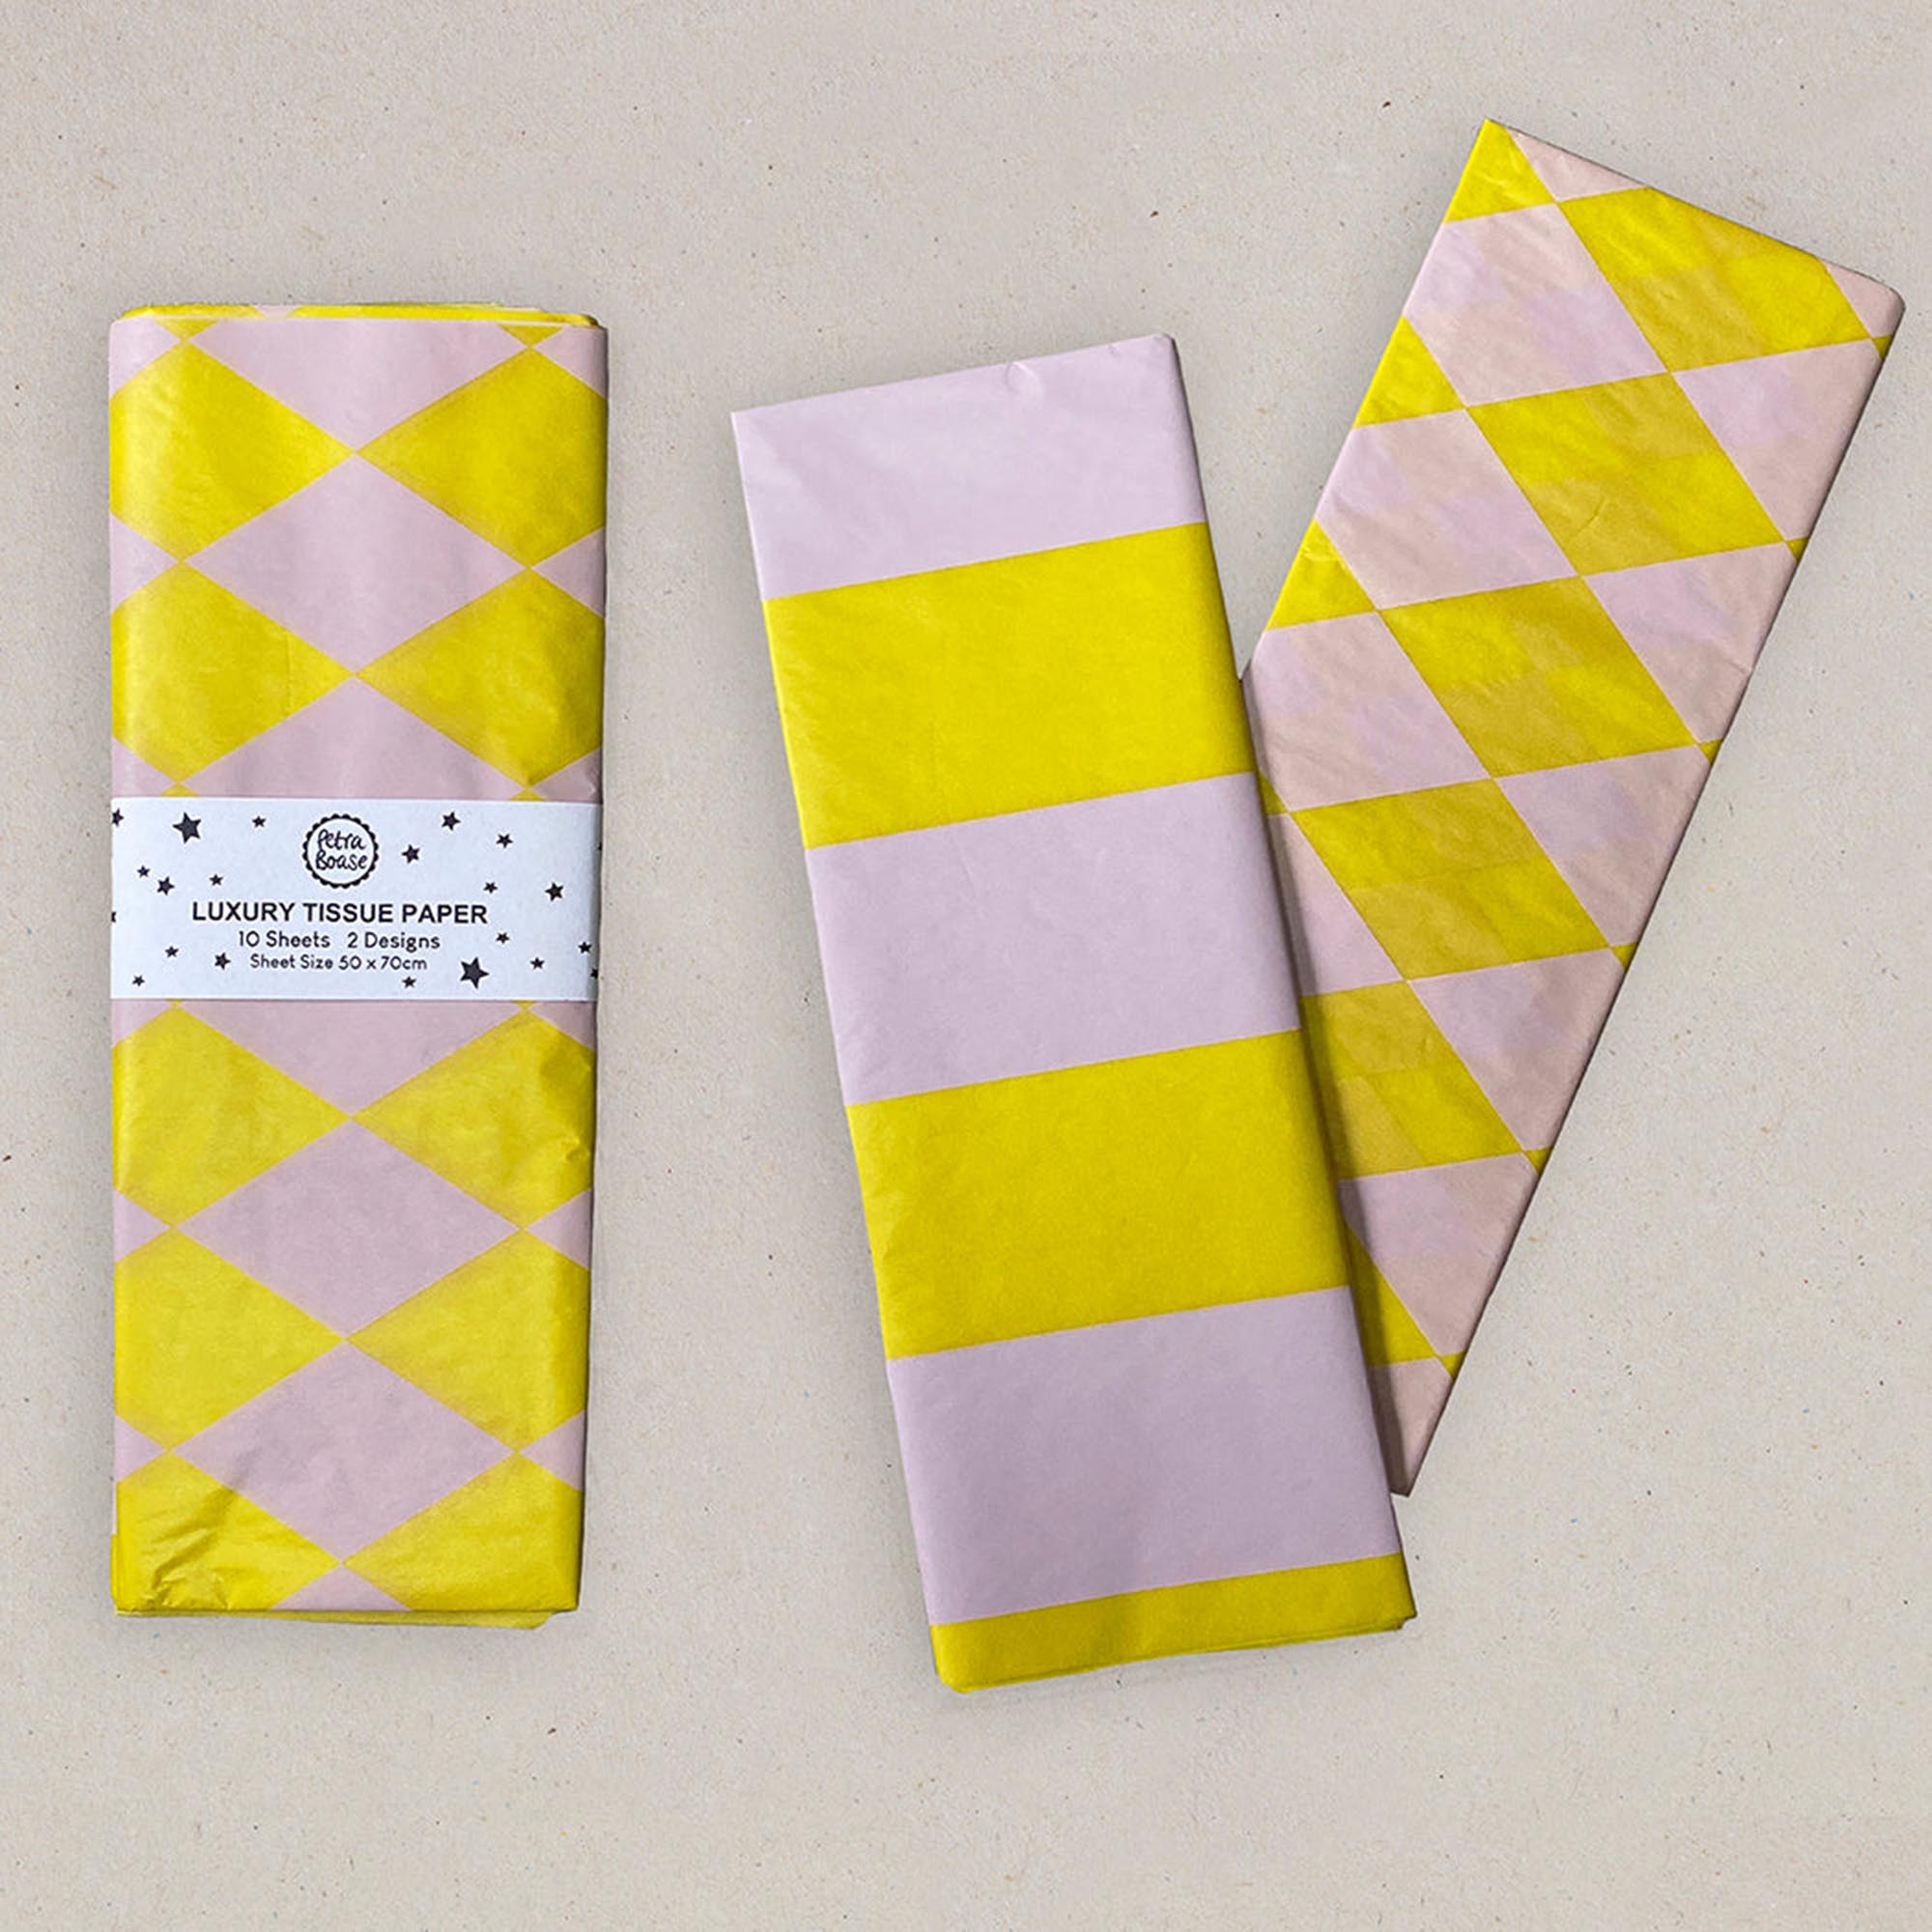 Luxury tissue paper - yellow and dusty lilac